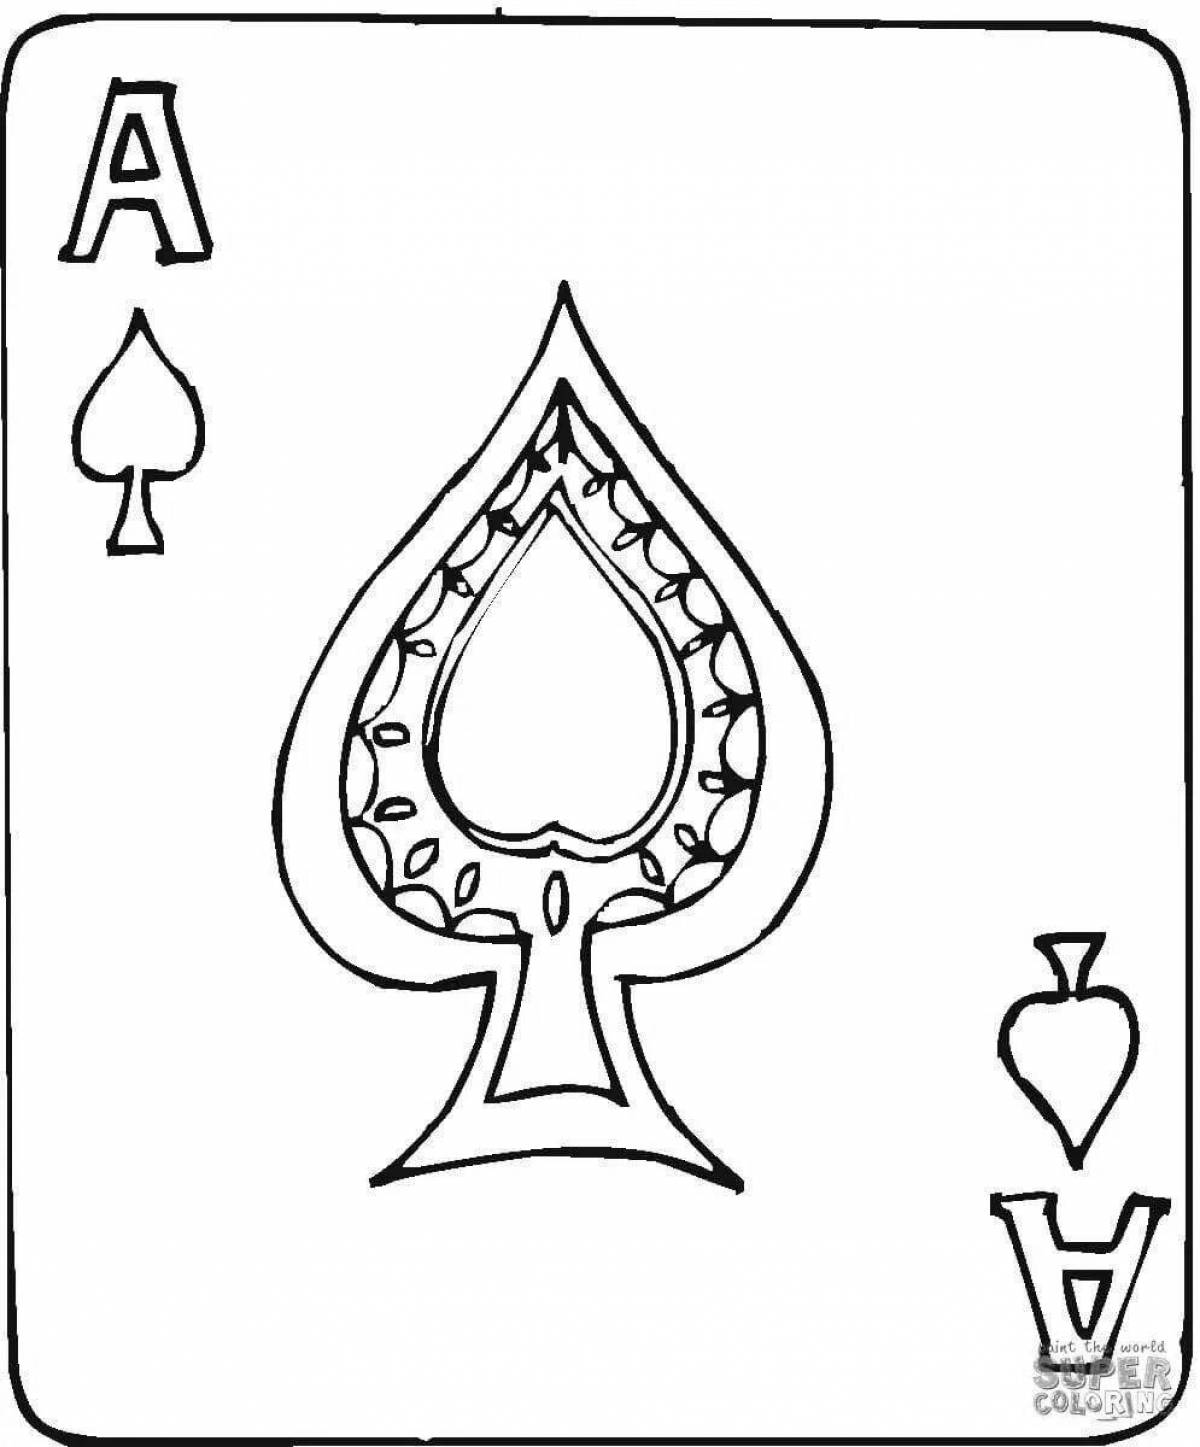 Playing cards #14